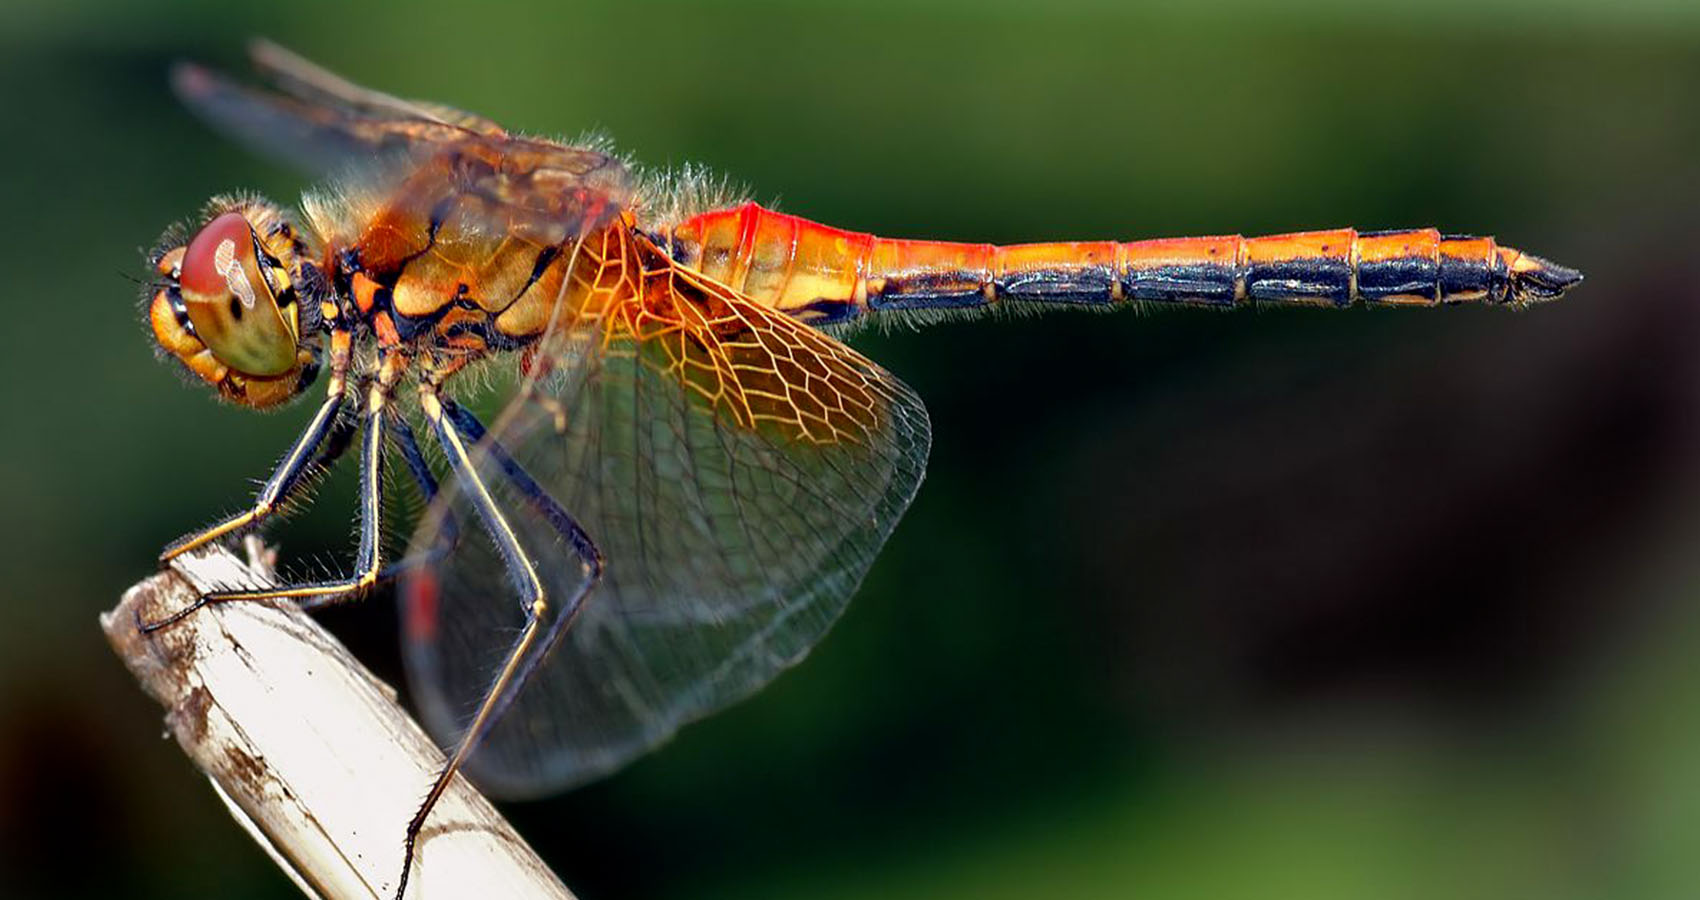 hard to believe facts - Dragonflies accelerate at up to 4G and corner at up to 9G